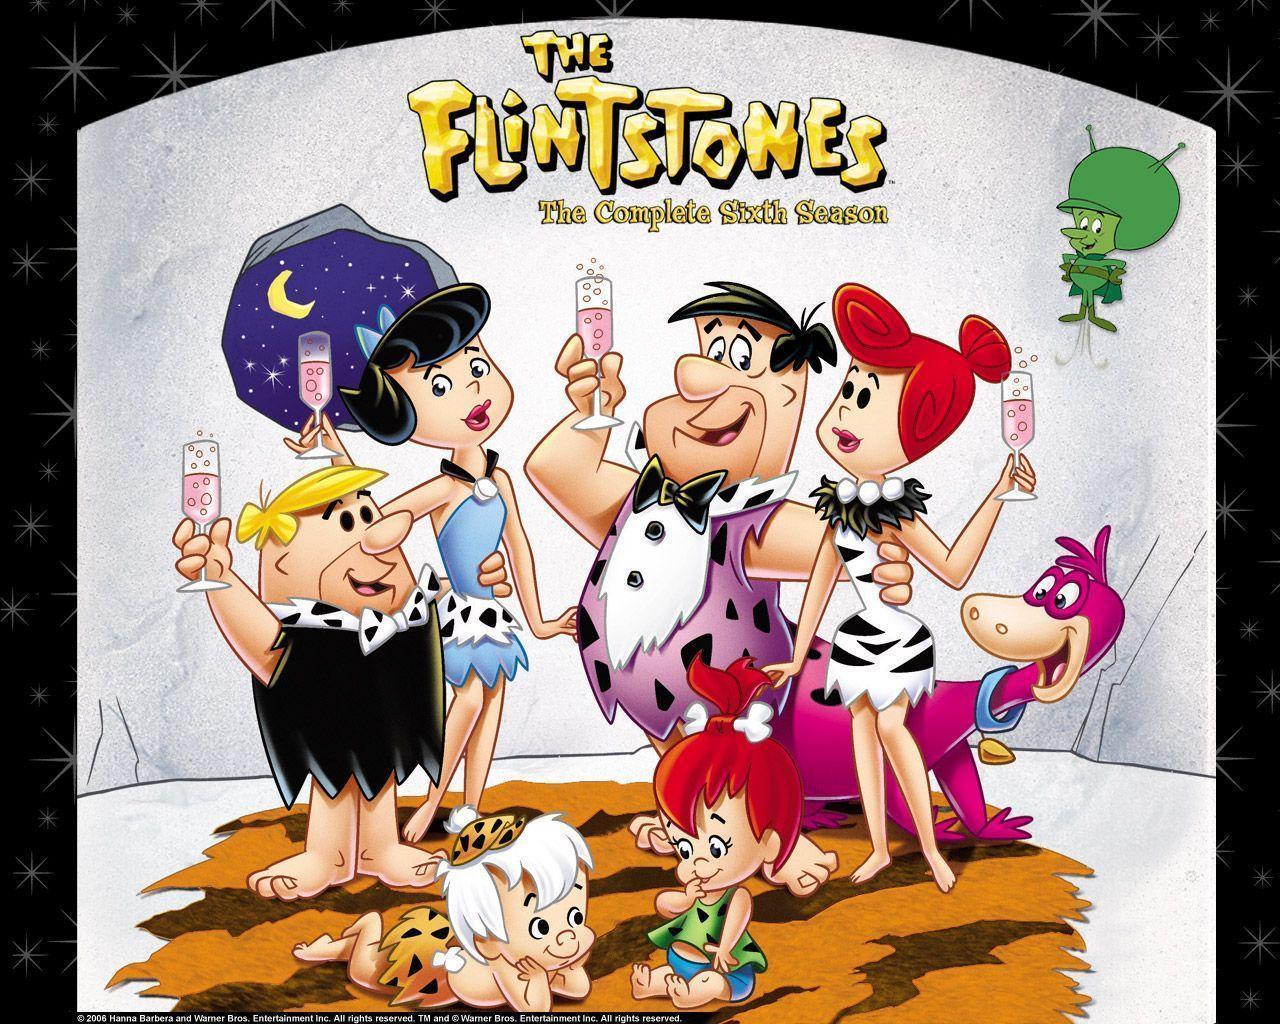 The Flintstones Complete Sixth Season on DVD Official Site